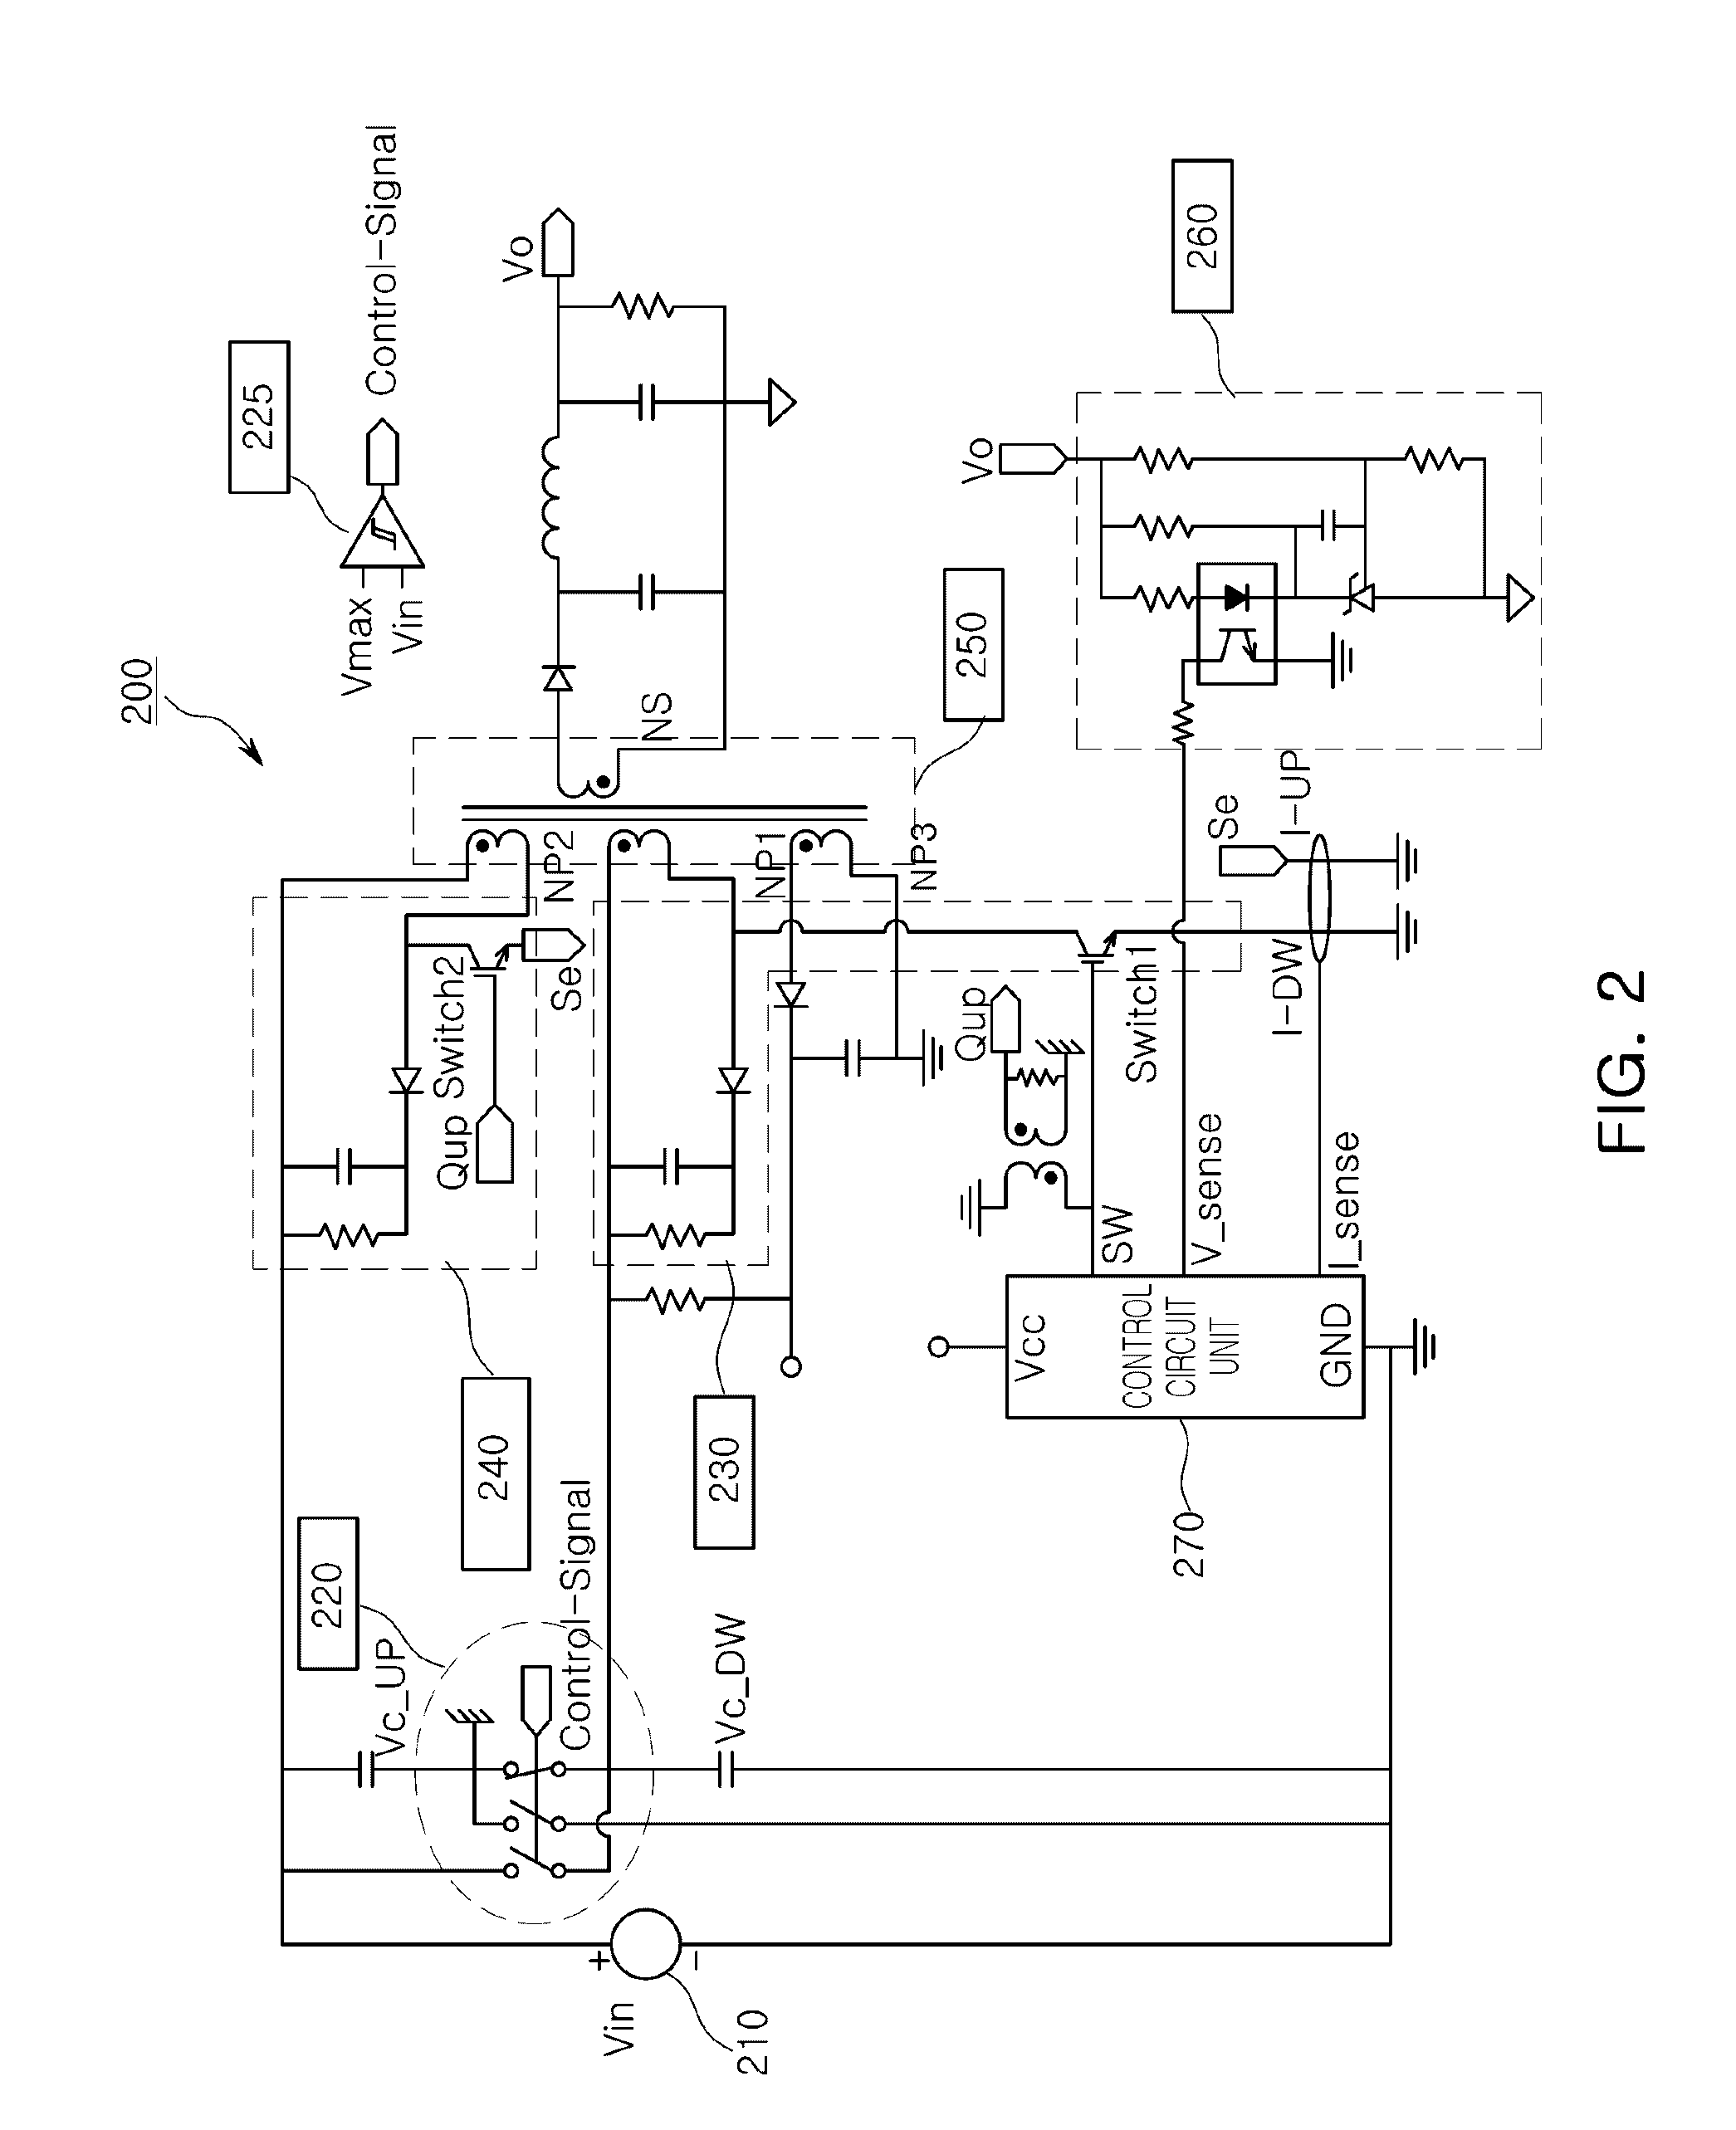 Power supplying apparatus, method of operating the same, and solar power generation system including the same